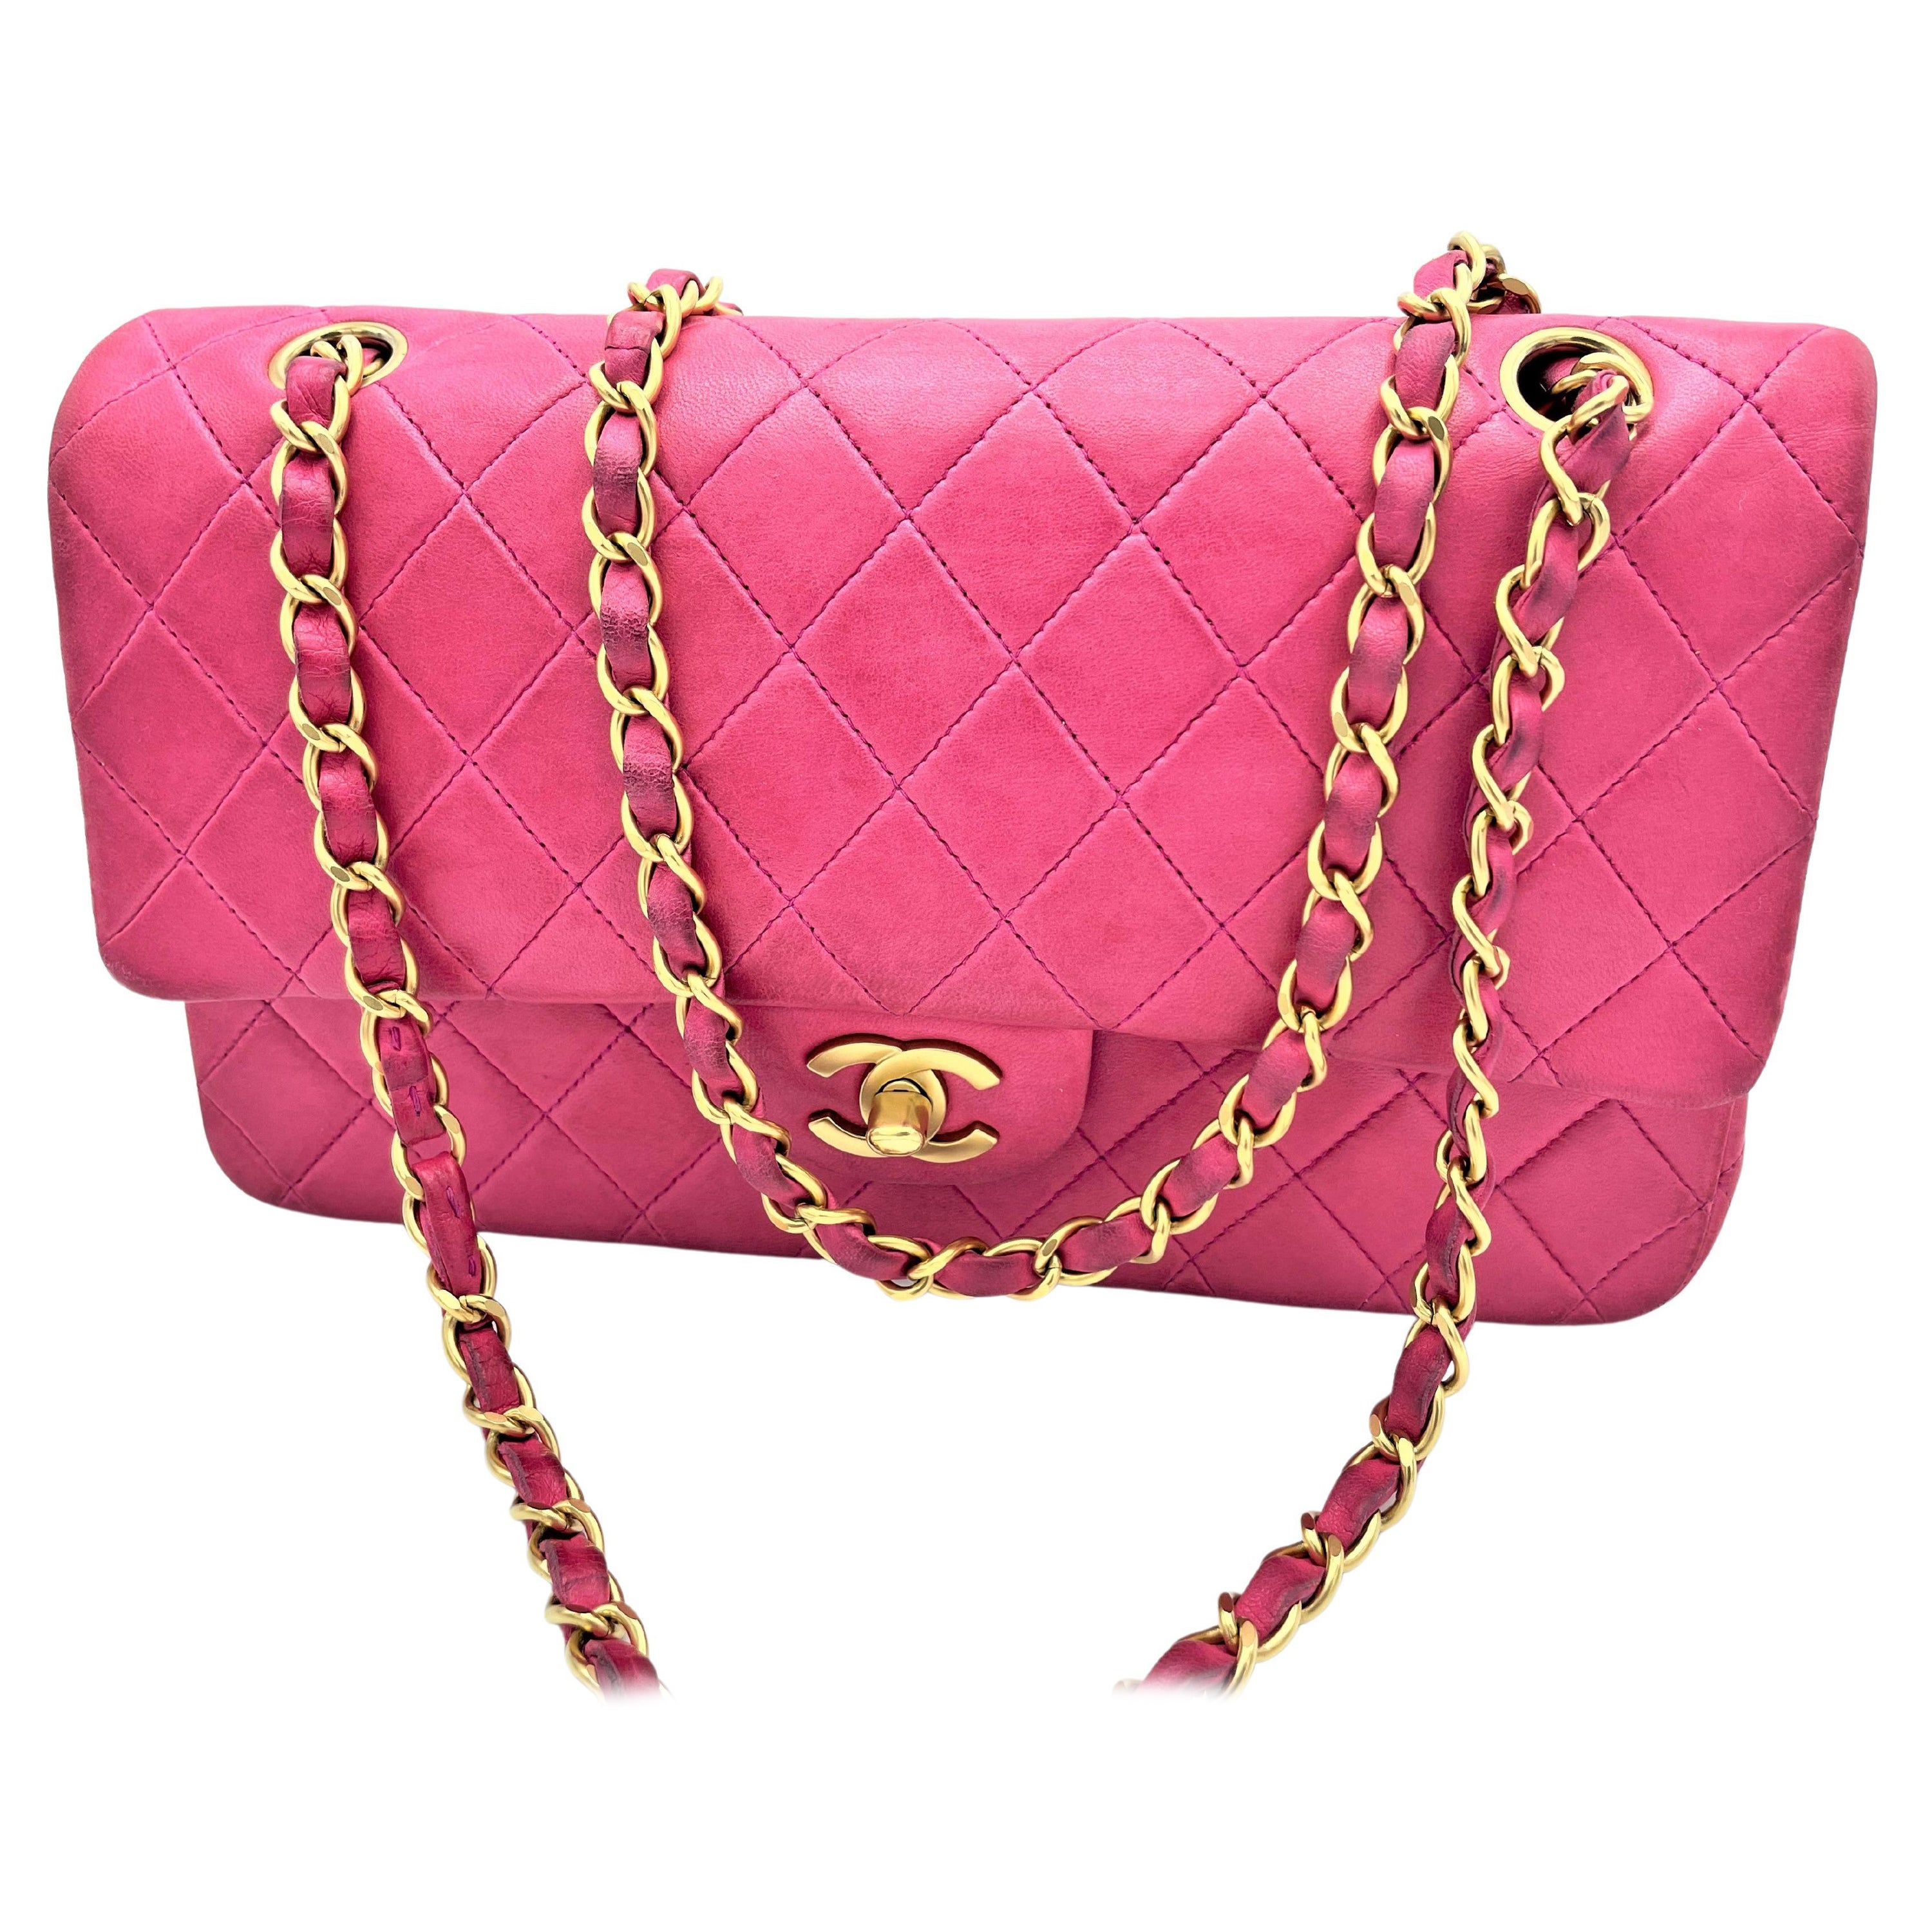 Vintage CHANEL quilted double flap bag, lambskin leather, medium in pink, 1995  